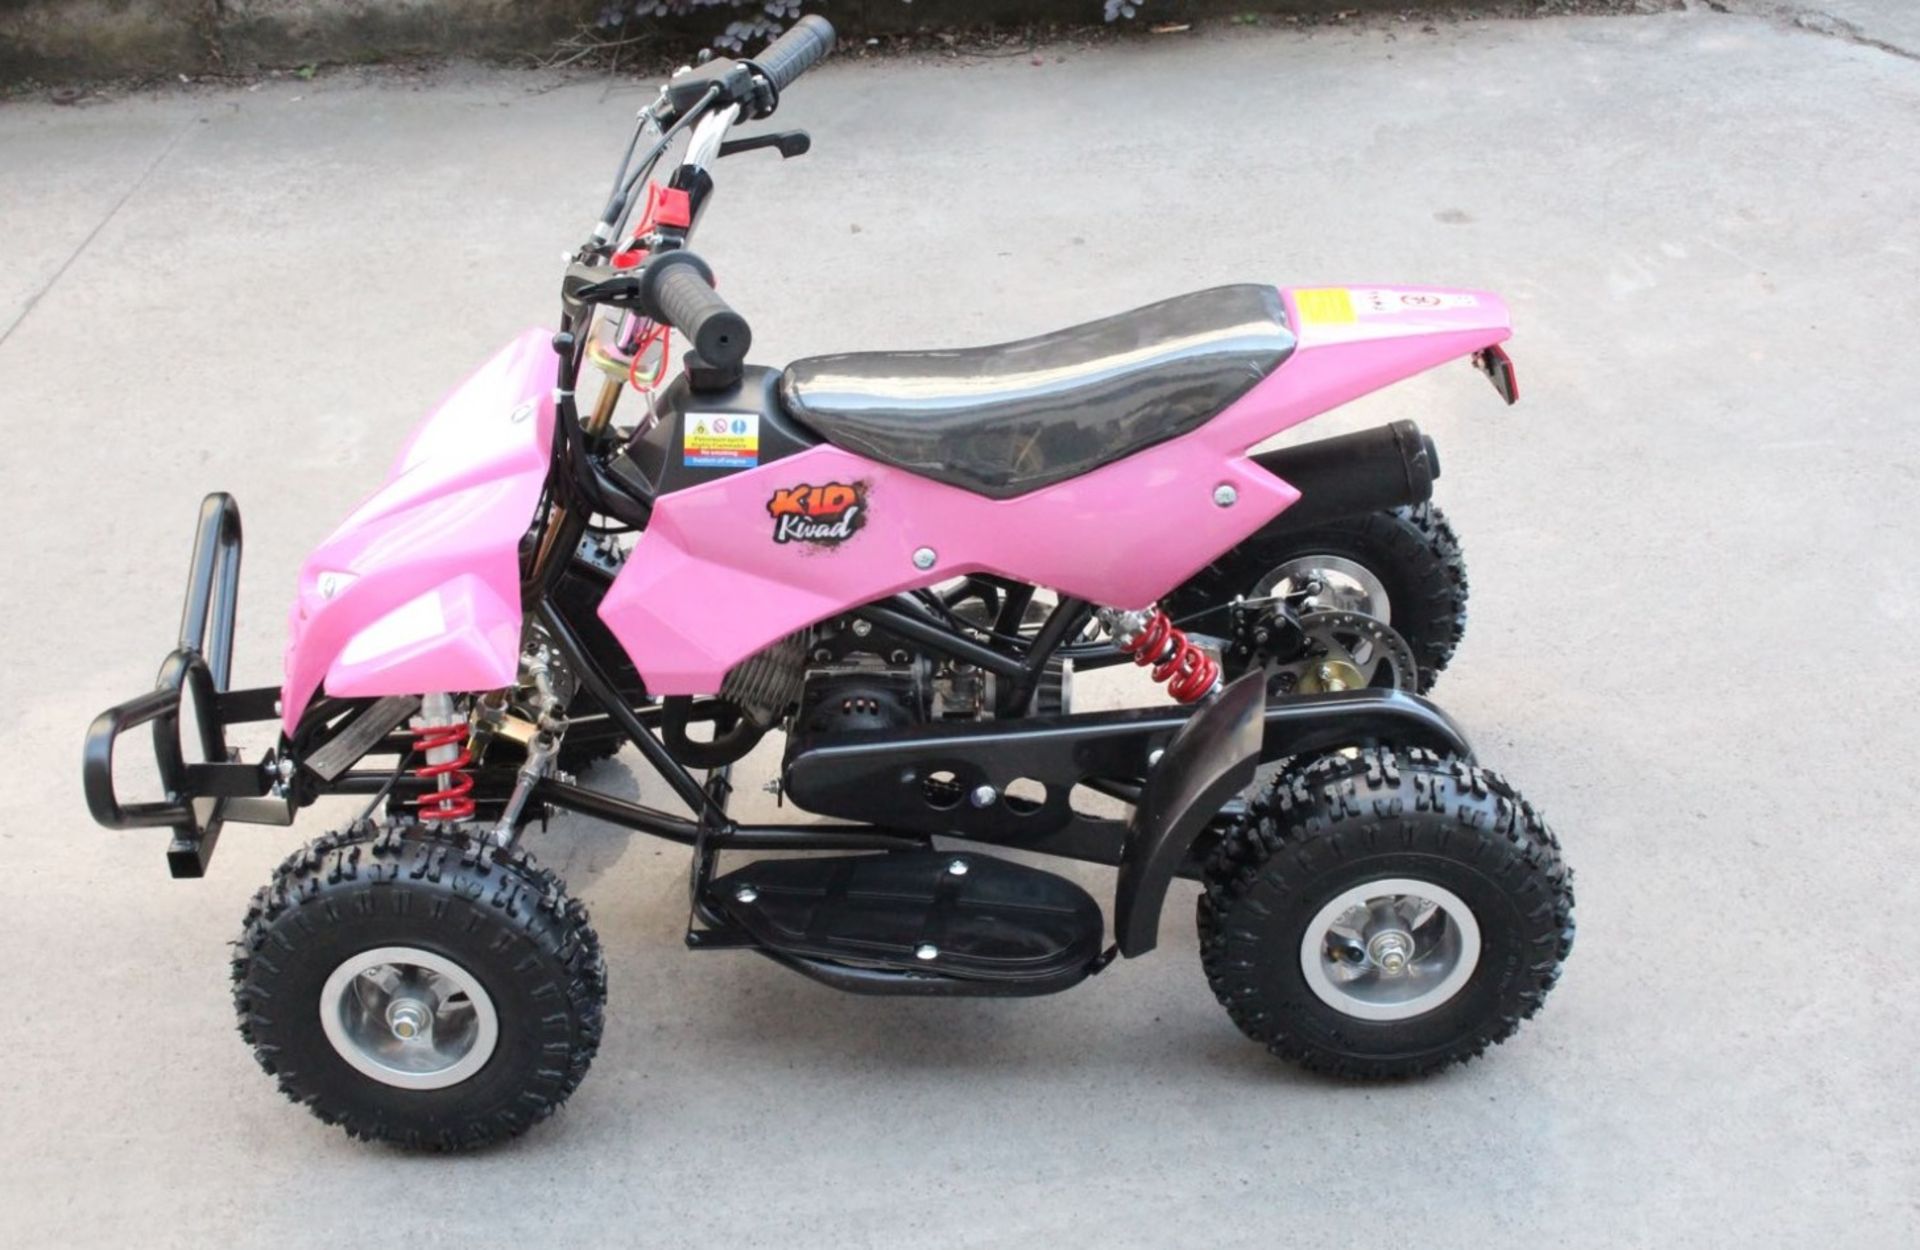 + VAT Brand New 50cc Mini Quad Bike FRM - Colours May Vary - Picture May Vary From Actual Item - Image 2 of 9